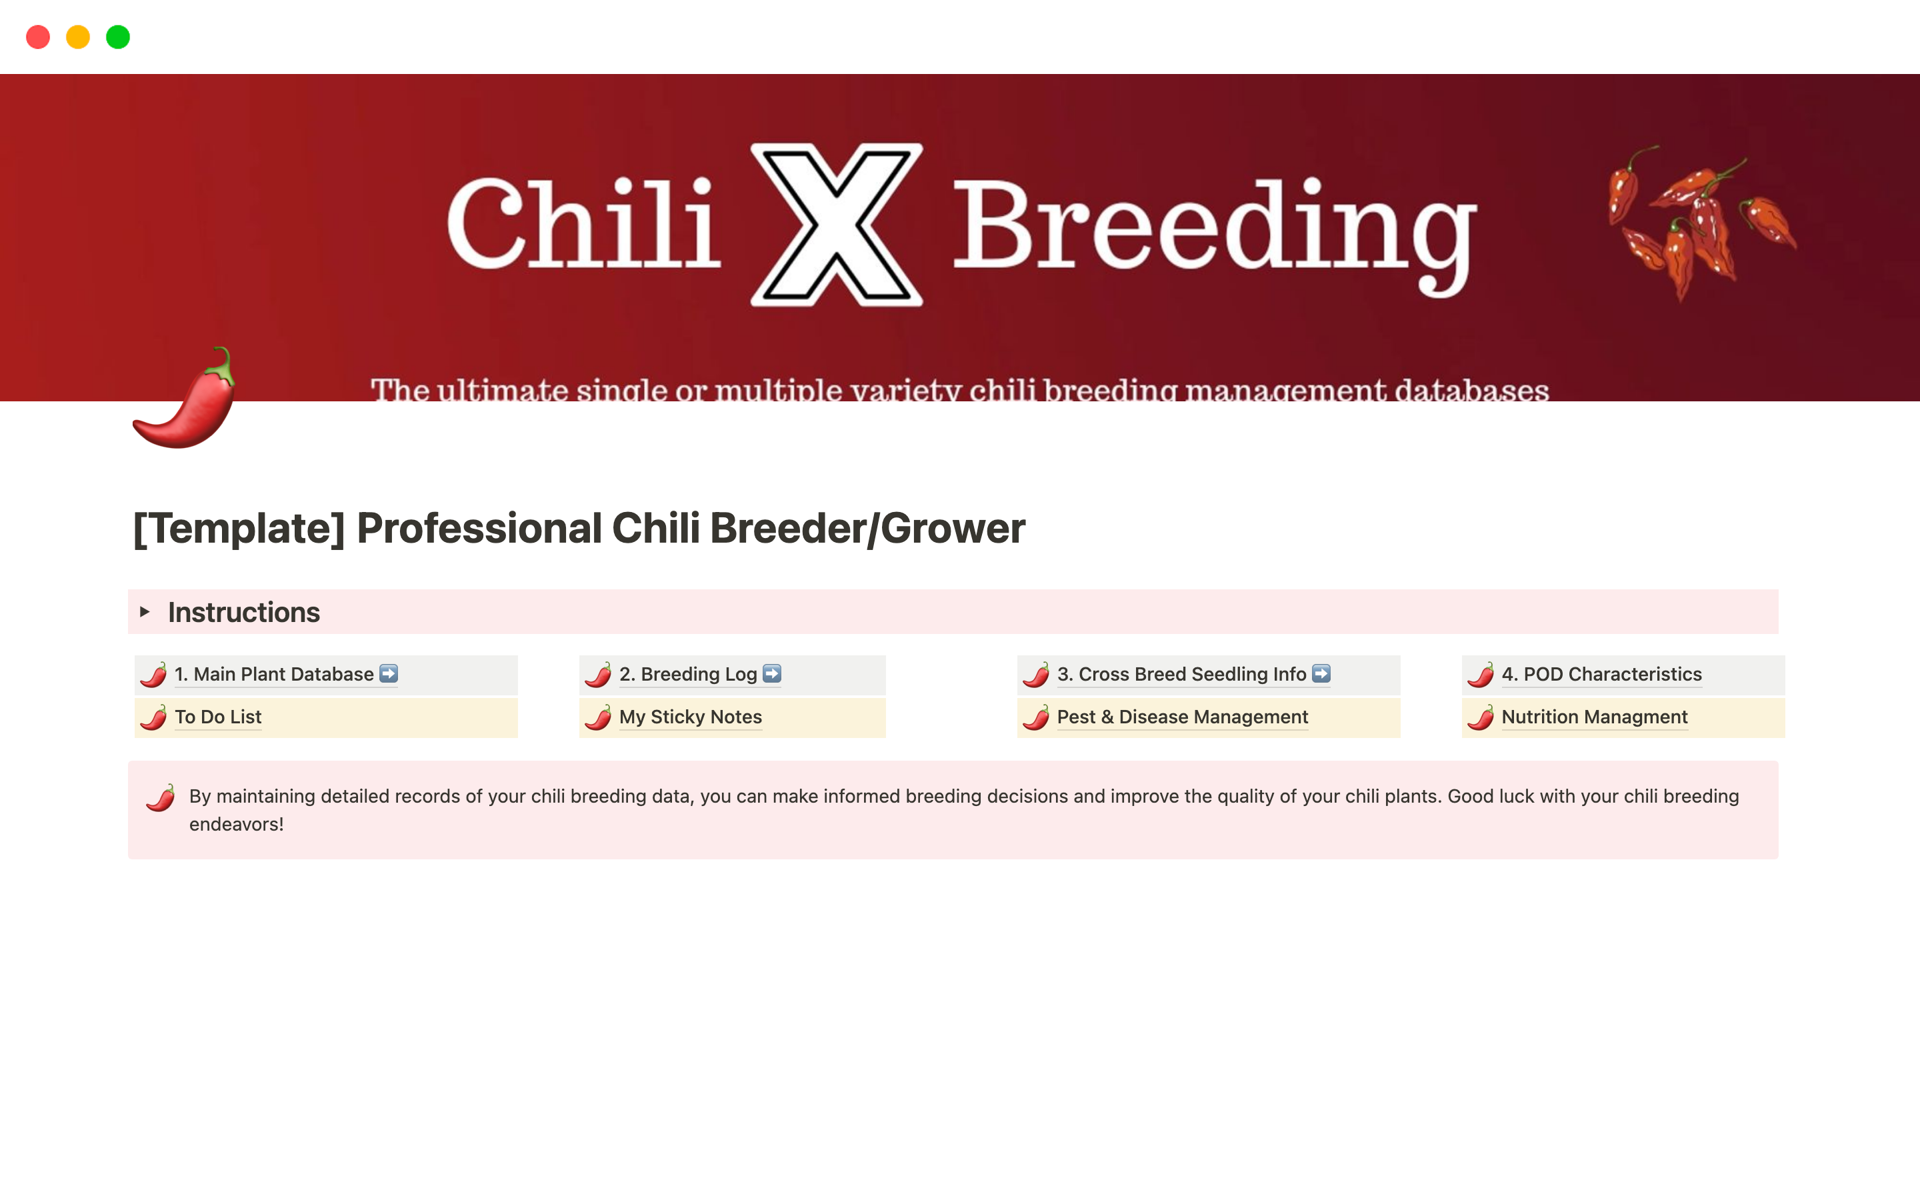 Track all your chili growing and breeding activities with this professional Notion template